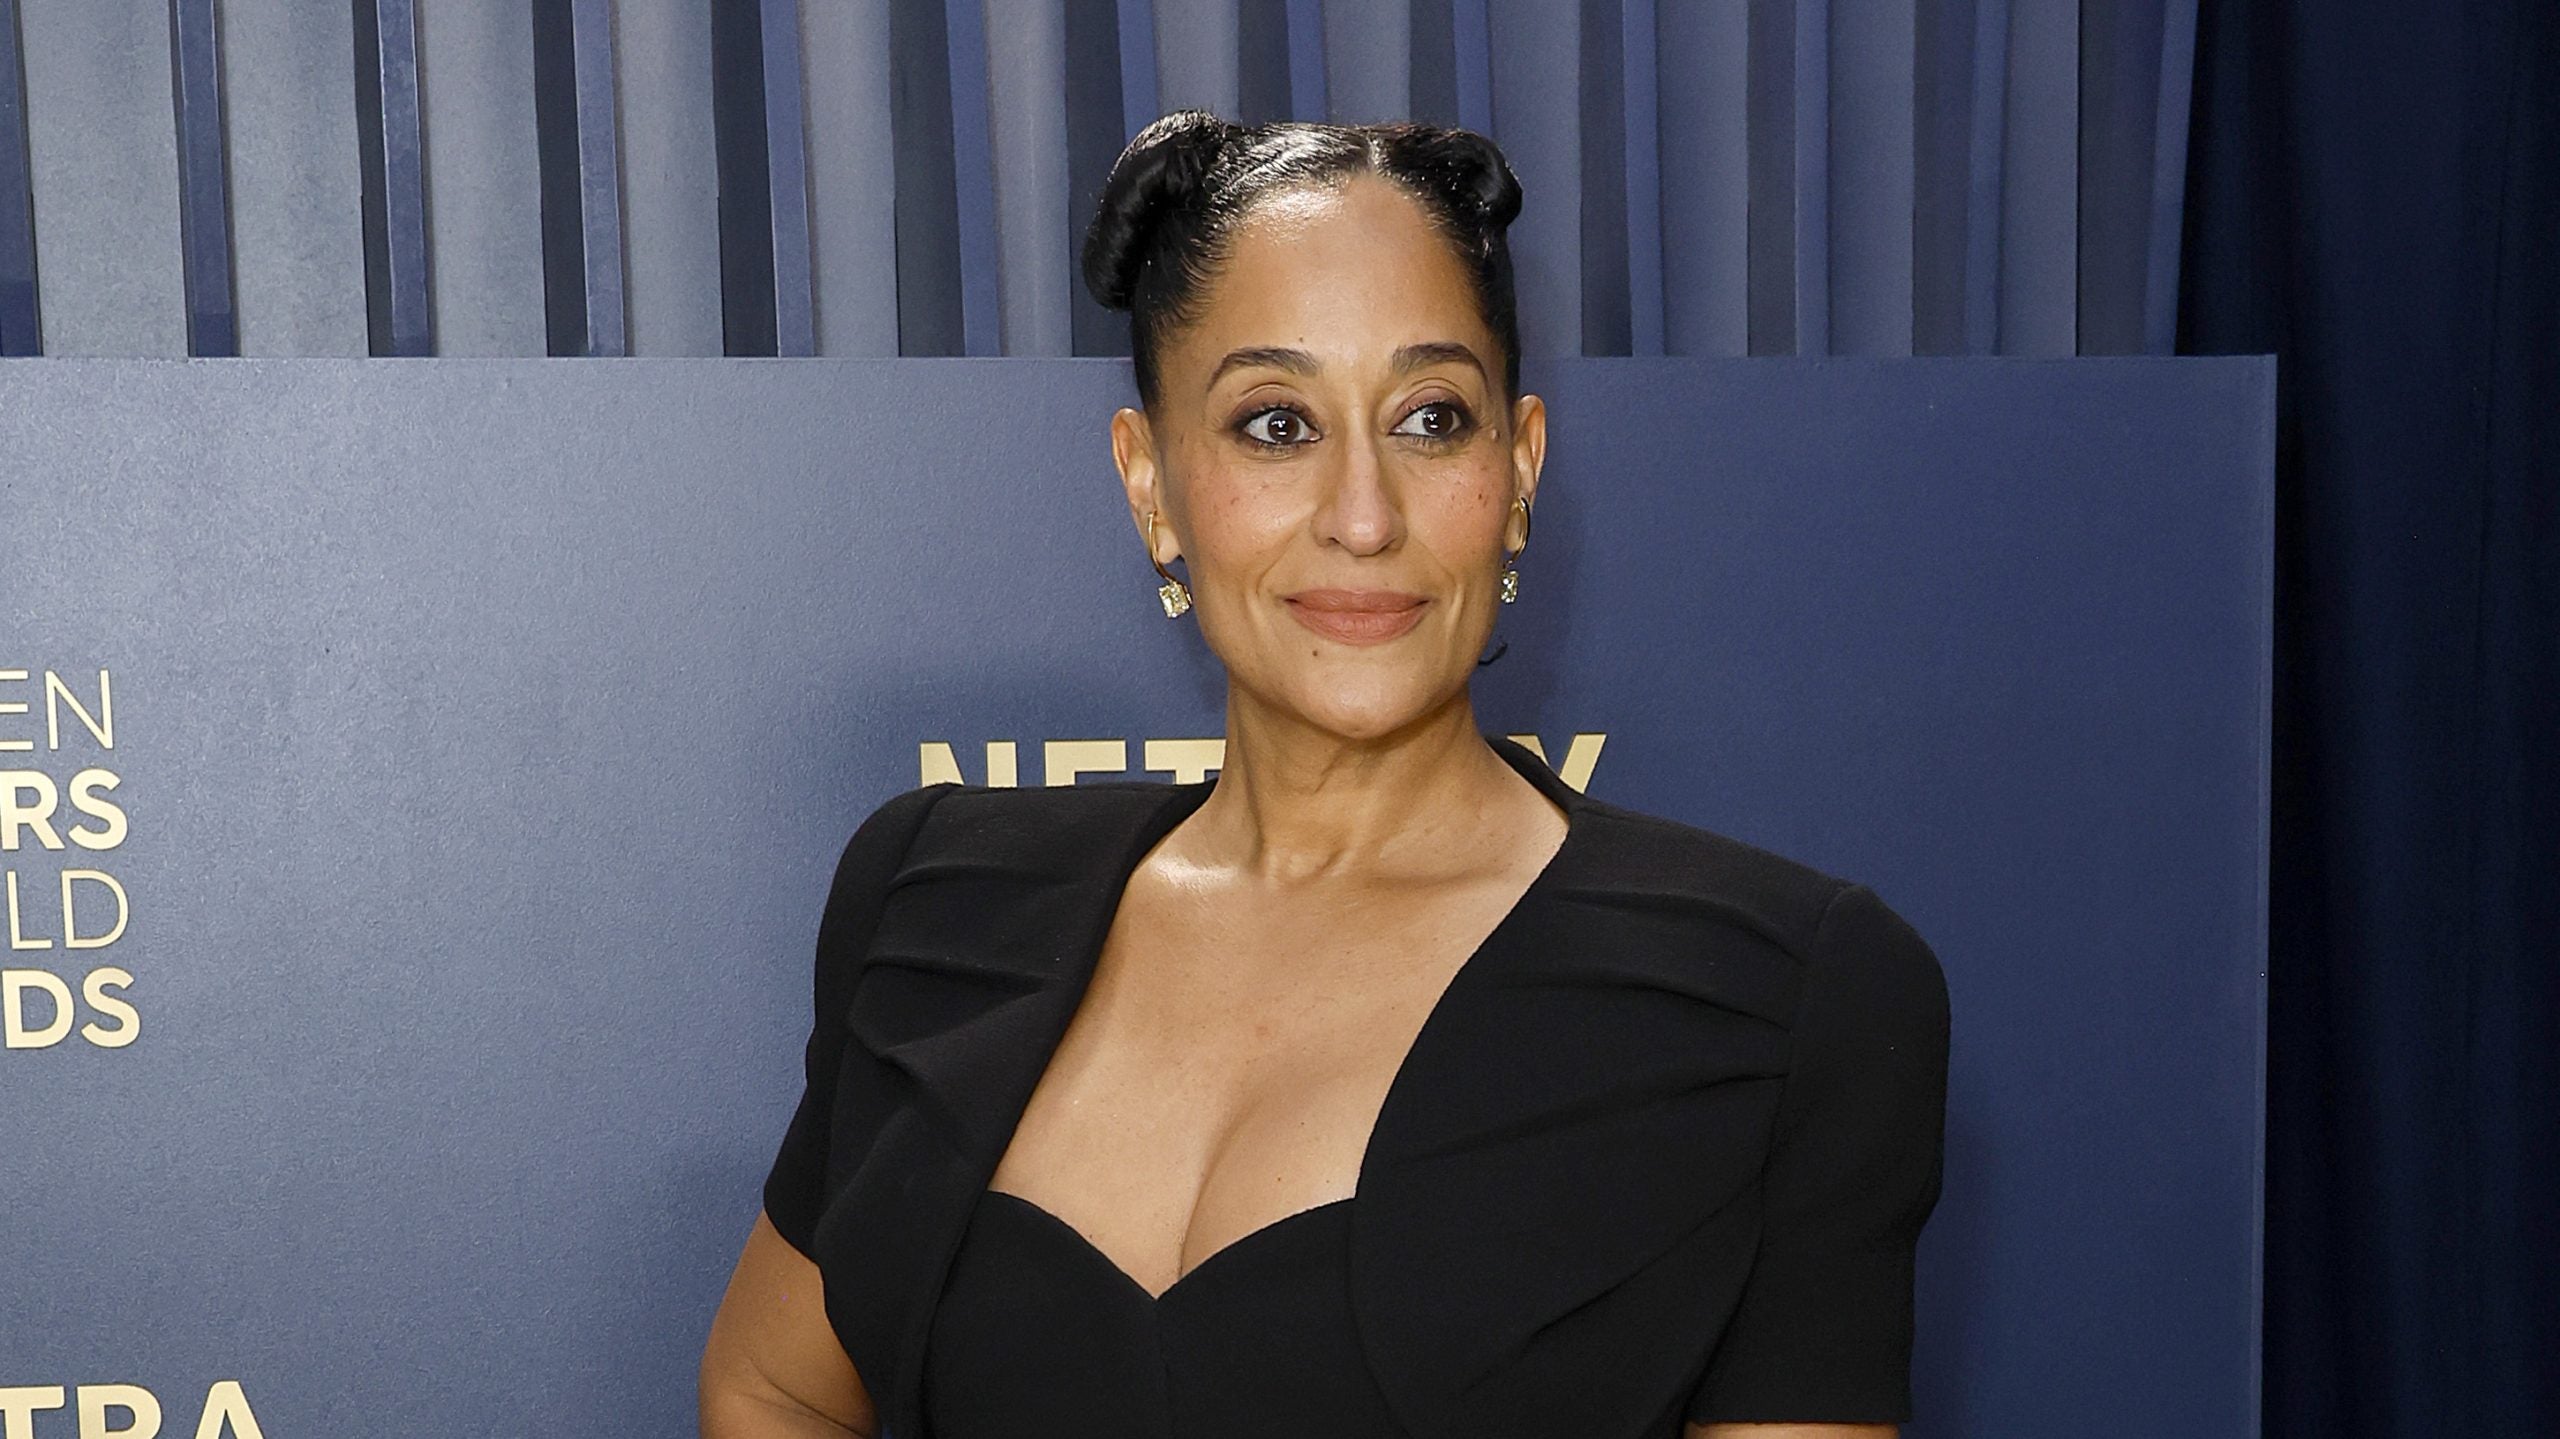 How Tracee Ellis Ross Achieved Glowing Skin For The SAG Awards